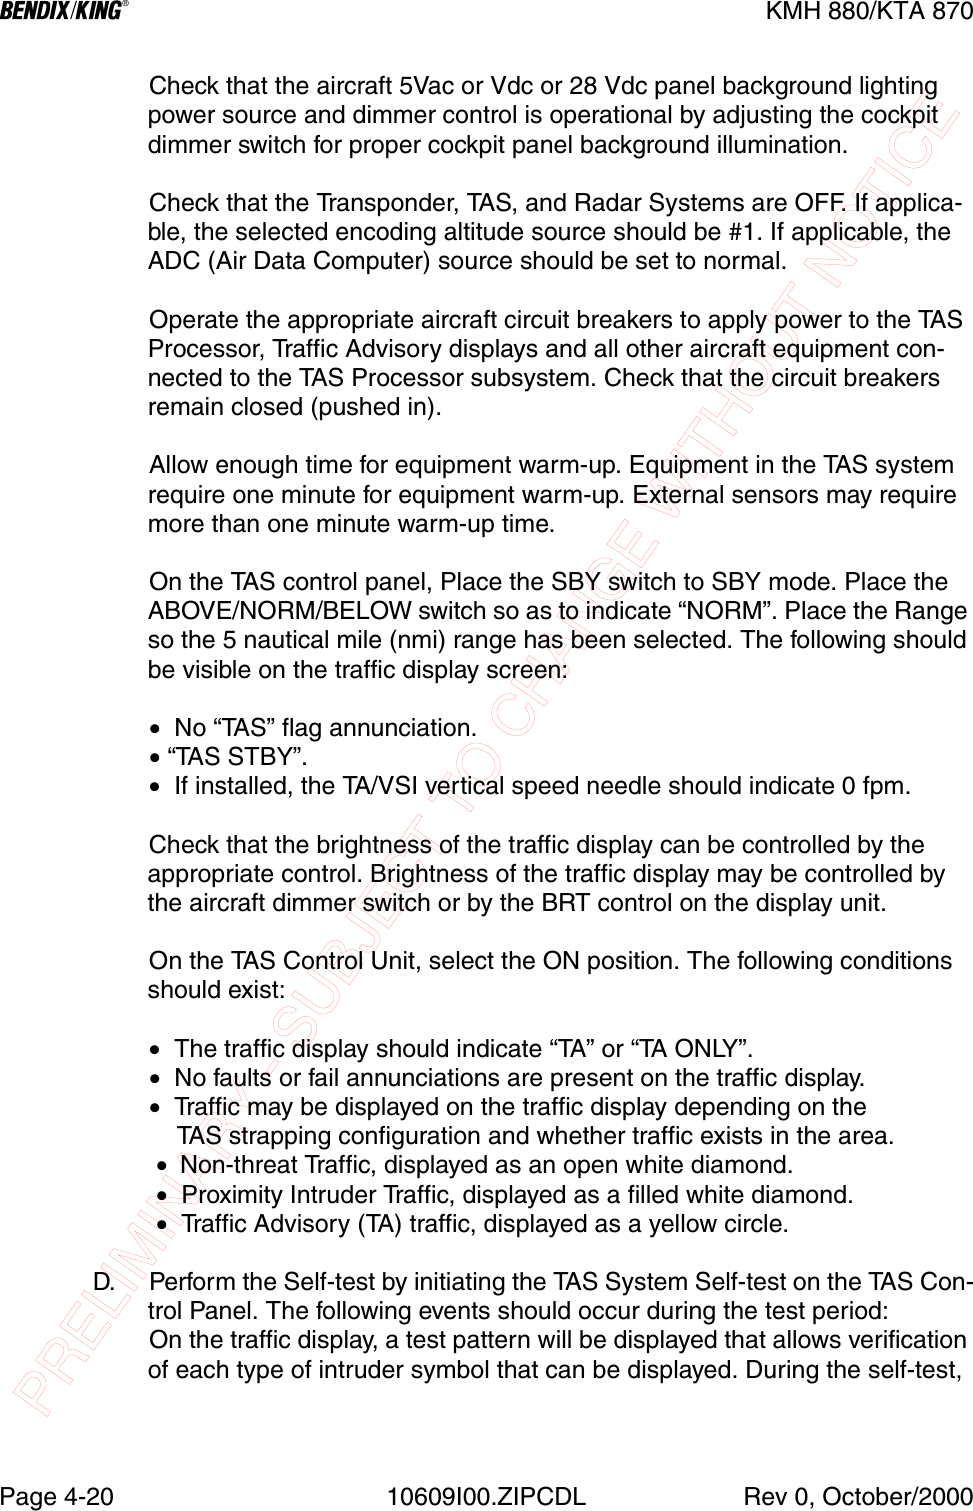 PRELIMINARY - SUBJECT TO CHANGE WITHOUT NOTICEBKMH 880/KTA 870Page 4-20 10609I00.ZIPCDL Rev 0, October/2000Check that the aircraft 5Vac or Vdc or 28 Vdc panel background lighting power source and dimmer control is operational by adjusting the cockpit dimmer switch for proper cockpit panel background illumination.Check that the Transponder, TAS, and Radar Systems are OFF. If applica-ble, the selected encoding altitude source should be #1. If applicable, the ADC (Air Data Computer) source should be set to normal.Operate the appropriate aircraft circuit breakers to apply power to the TAS Processor, Traffic Advisory displays and all other aircraft equipment con-nected to the TAS Processor subsystem. Check that the circuit breakers remain closed (pushed in).Allow enough time for equipment warm-up. Equipment in the TAS system require one minute for equipment warm-up. External sensors may require more than one minute warm-up time.On the TAS control panel, Place the SBY switch to SBY mode. Place the ABOVE/NORM/BELOW switch so as to indicate “NORM”. Place the Range so the 5 nautical mile (nmi) range has been selected. The following should be visible on the traffic display screen:•  No “TAS” flag annunciation.• “TAS STBY”.•  If installed, the TA/VSI vertical speed needle should indicate 0 fpm.Check that the brightness of the traffic display can be controlled by the appropriate control. Brightness of the traffic display may be controlled by the aircraft dimmer switch or by the BRT control on the display unit.On the TAS Control Unit, select the ON position. The following conditions should exist:•  The traffic display should indicate “TA ” or “TA ONLY”.•  No faults or fail annunciations are present on the traffic display.•  Traffic may be displayed on the traffic display depending on the    TAS strapping configuration and whether traffic exists in the area. •  Non-threat Traffic, displayed as an open white diamond. •  Proximity Intruder Traffic, displayed as a filled white diamond. •  Traffic Advisory (TA) traffic, displayed as a yellow circle.D. Perform the Self-test by initiating the TAS System Self-test on the TAS Con-trol Panel. The following events should occur during the test period:On the traffic display, a test pattern will be displayed that allows verification of each type of intruder symbol that can be displayed. During the self-test, 